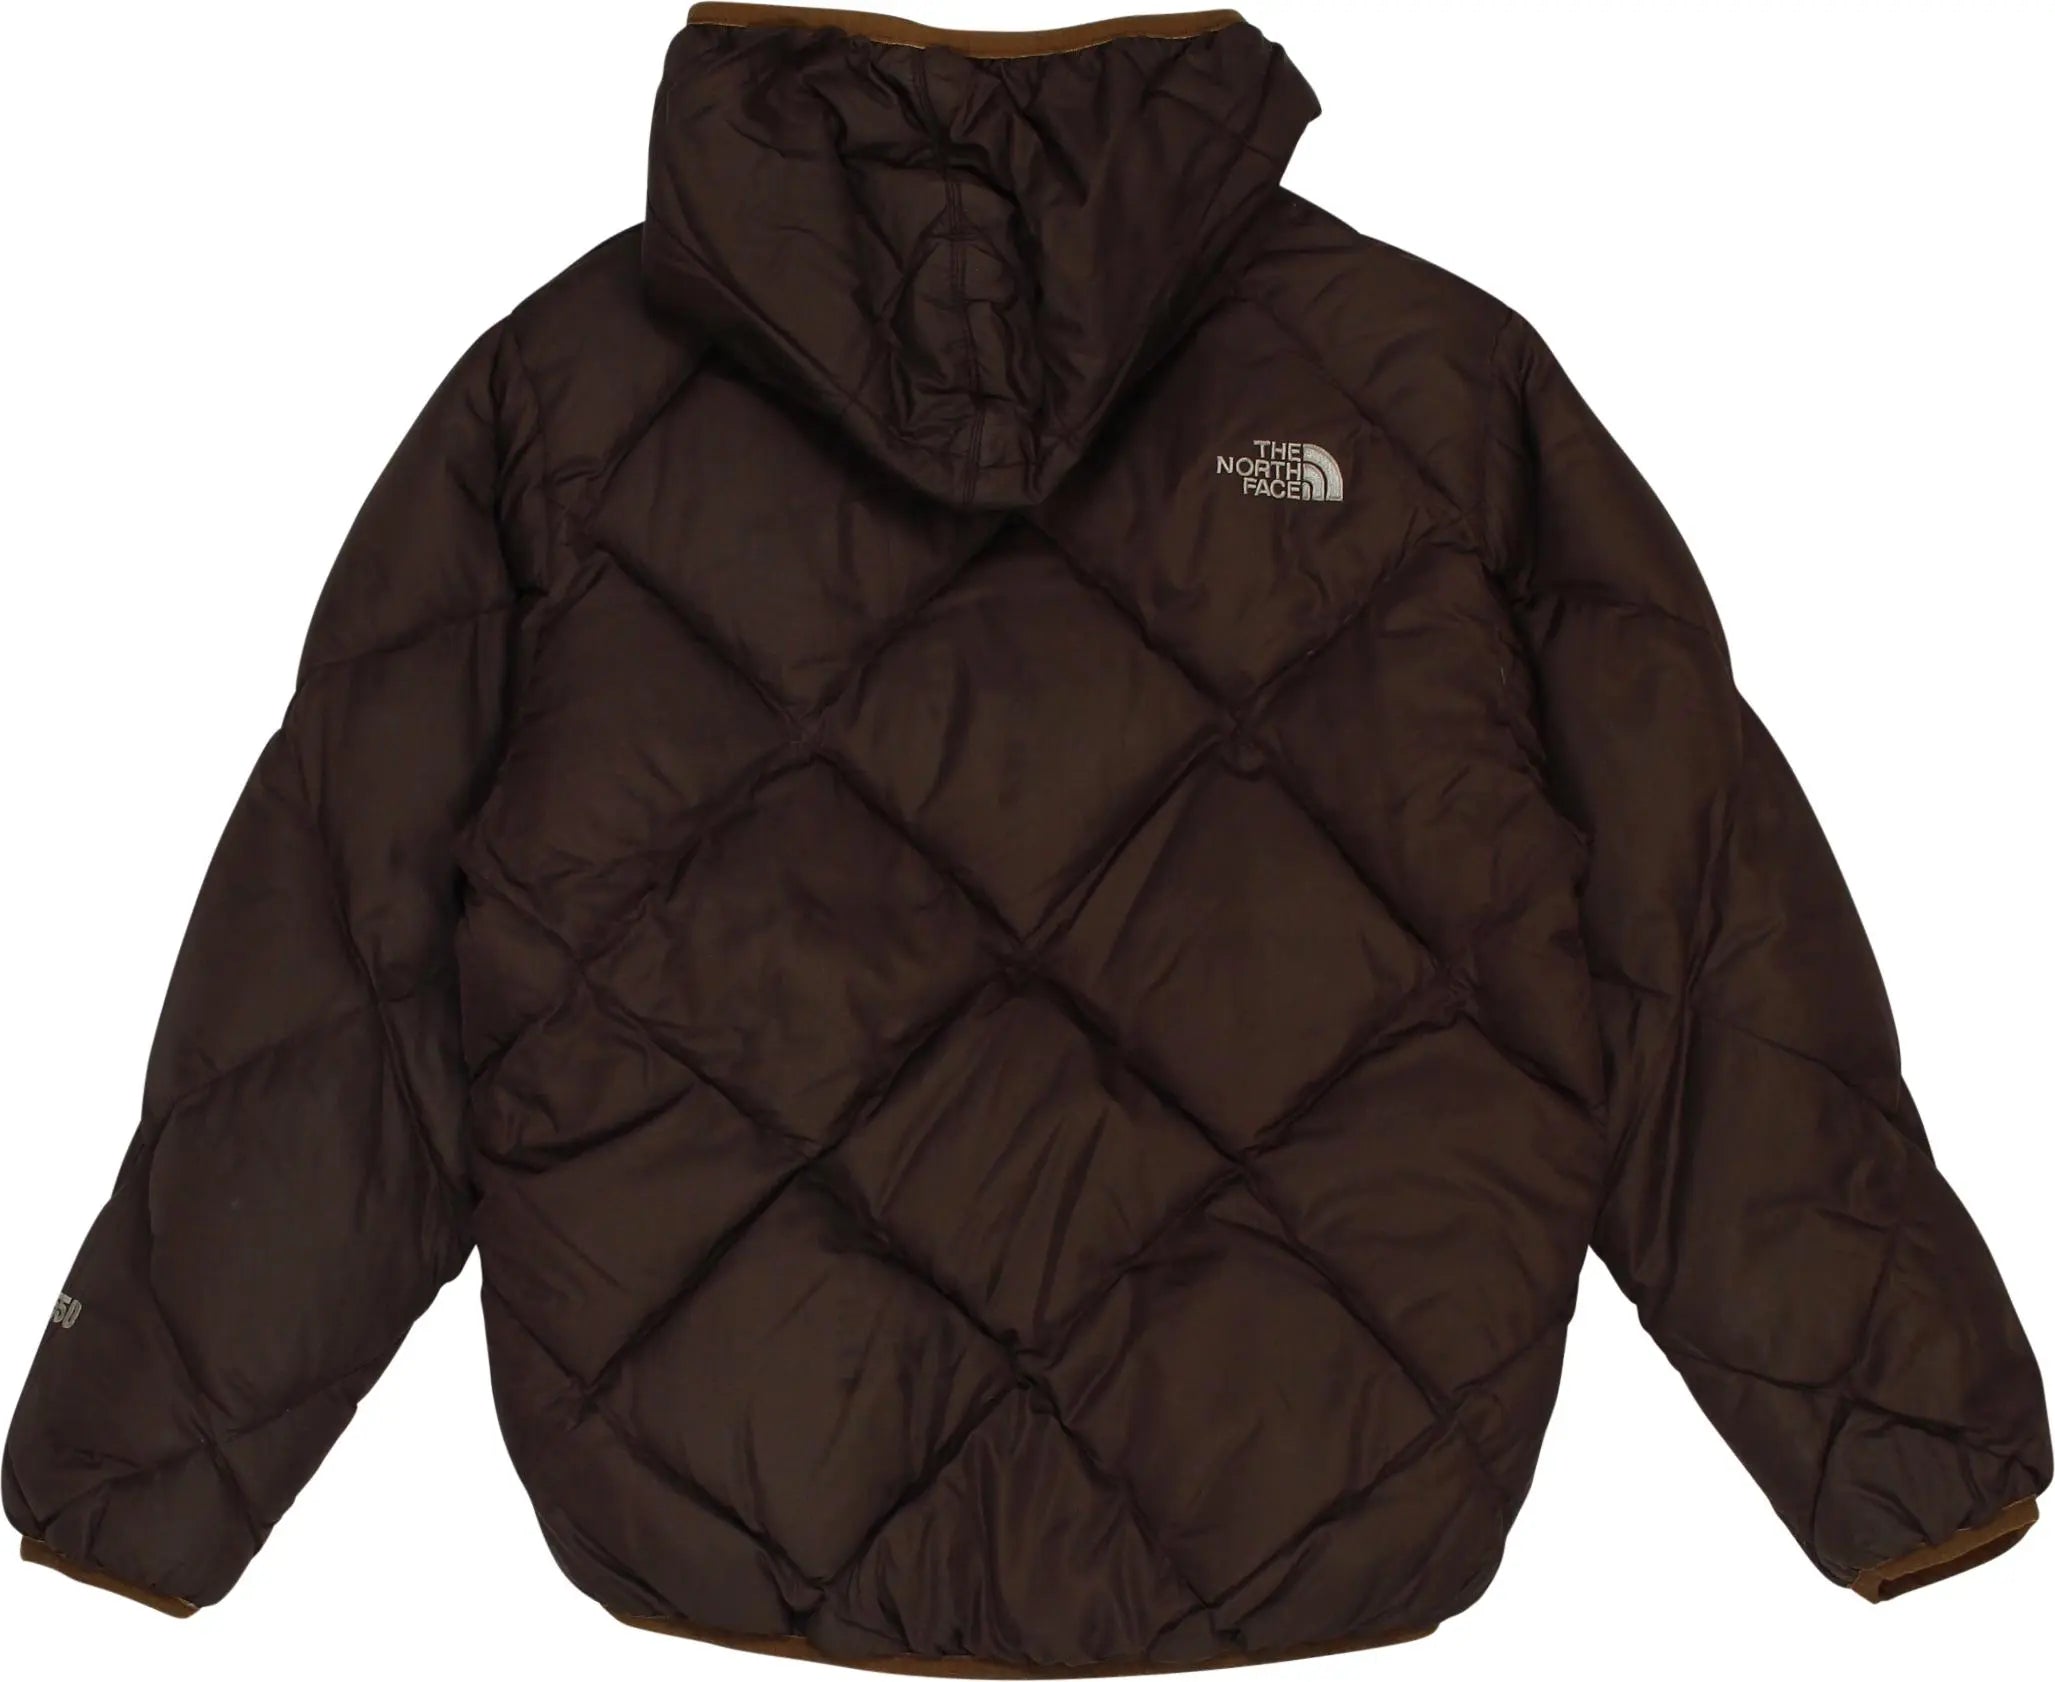 The North Face - Padded Jacket by The North Face- ThriftTale.com - Vintage and second handclothing